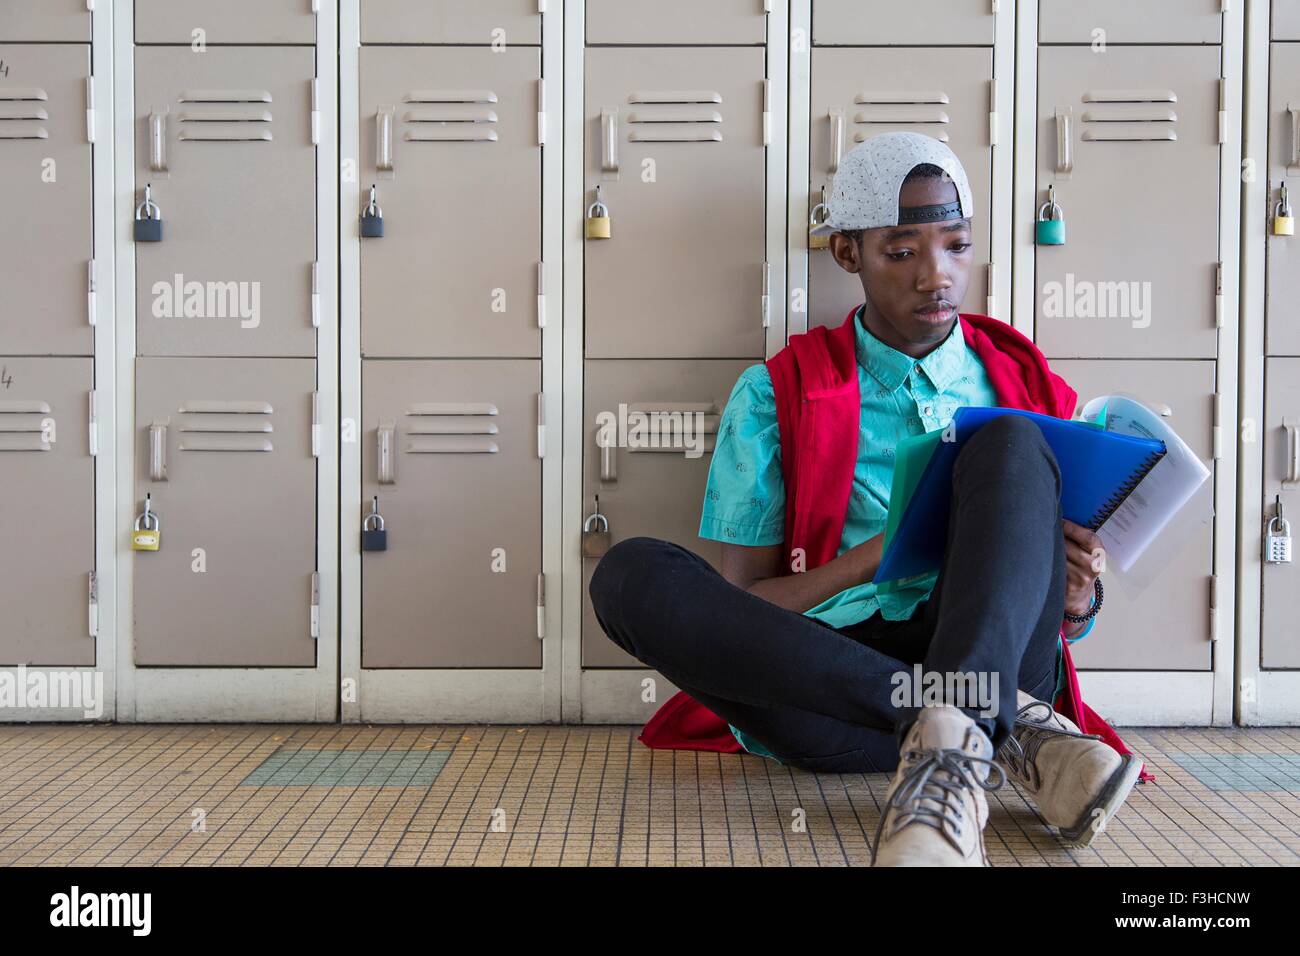 Student leaning against lockers, reading textbook Stock Photo